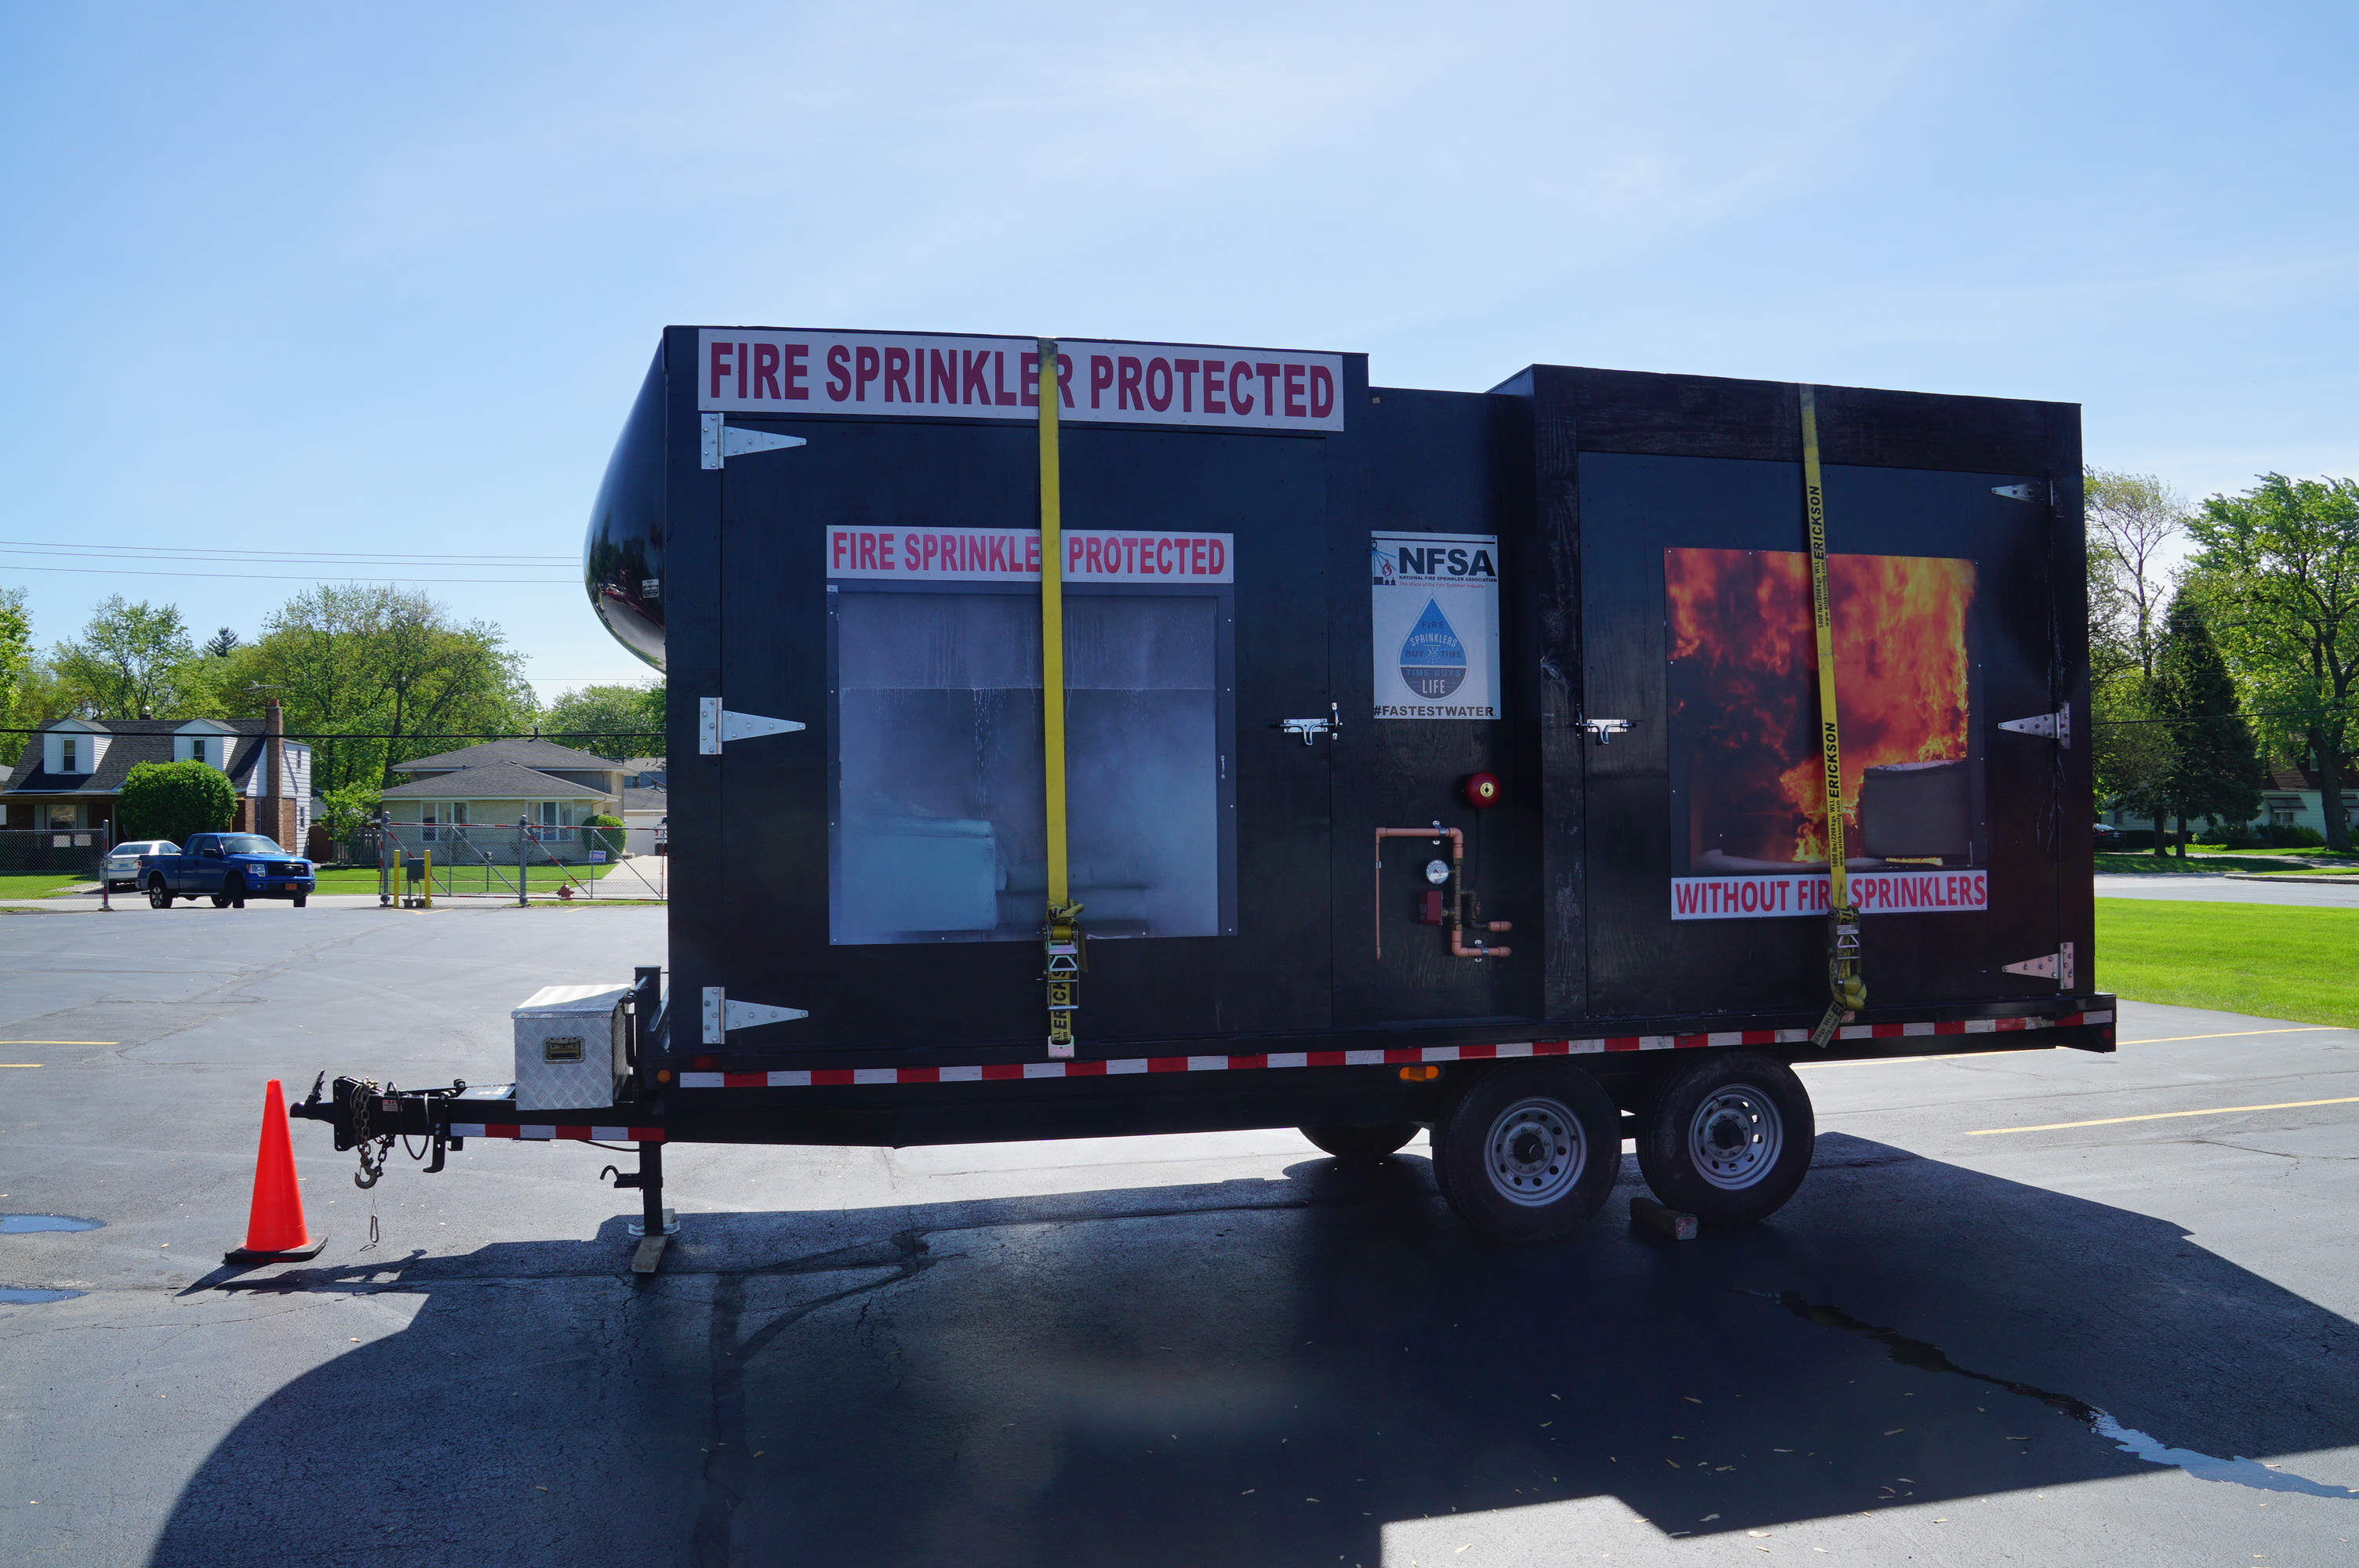 This is the side-by-side burn demonstration trailer available from NIFSAB, and NFSA. NIFSAB owns this vehicle and maintains it.